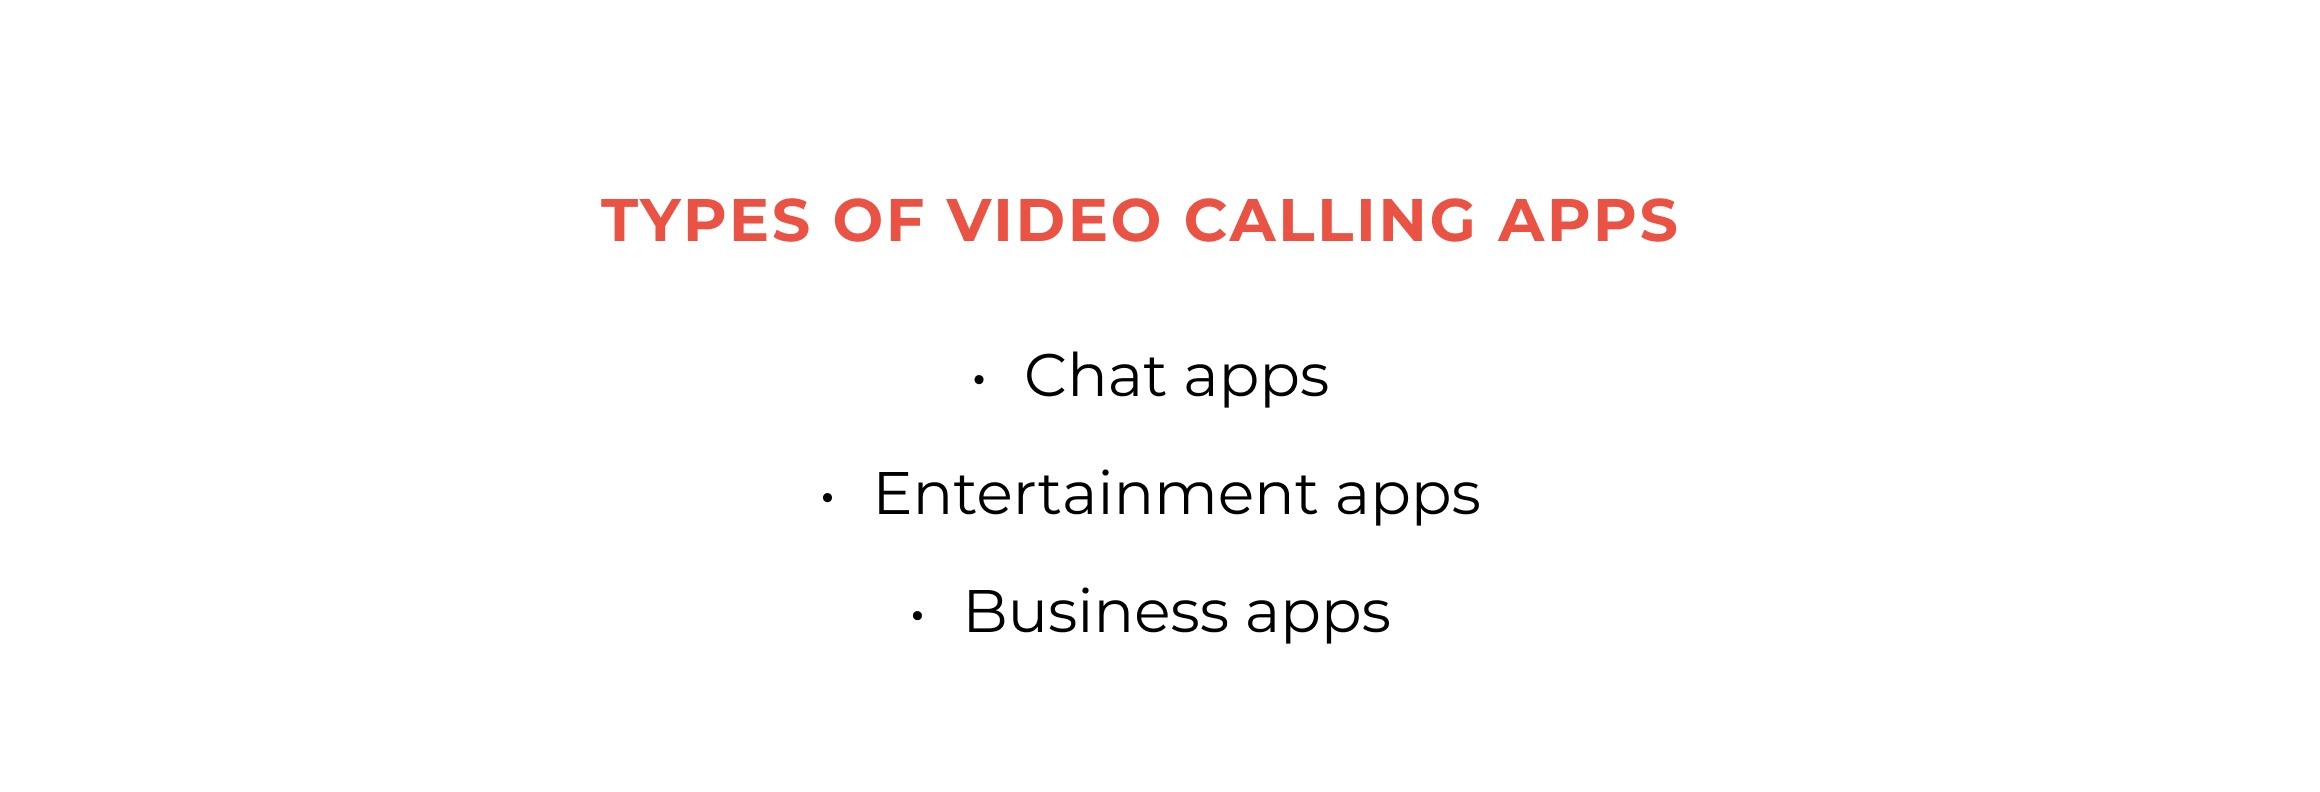 Types of video calling apps